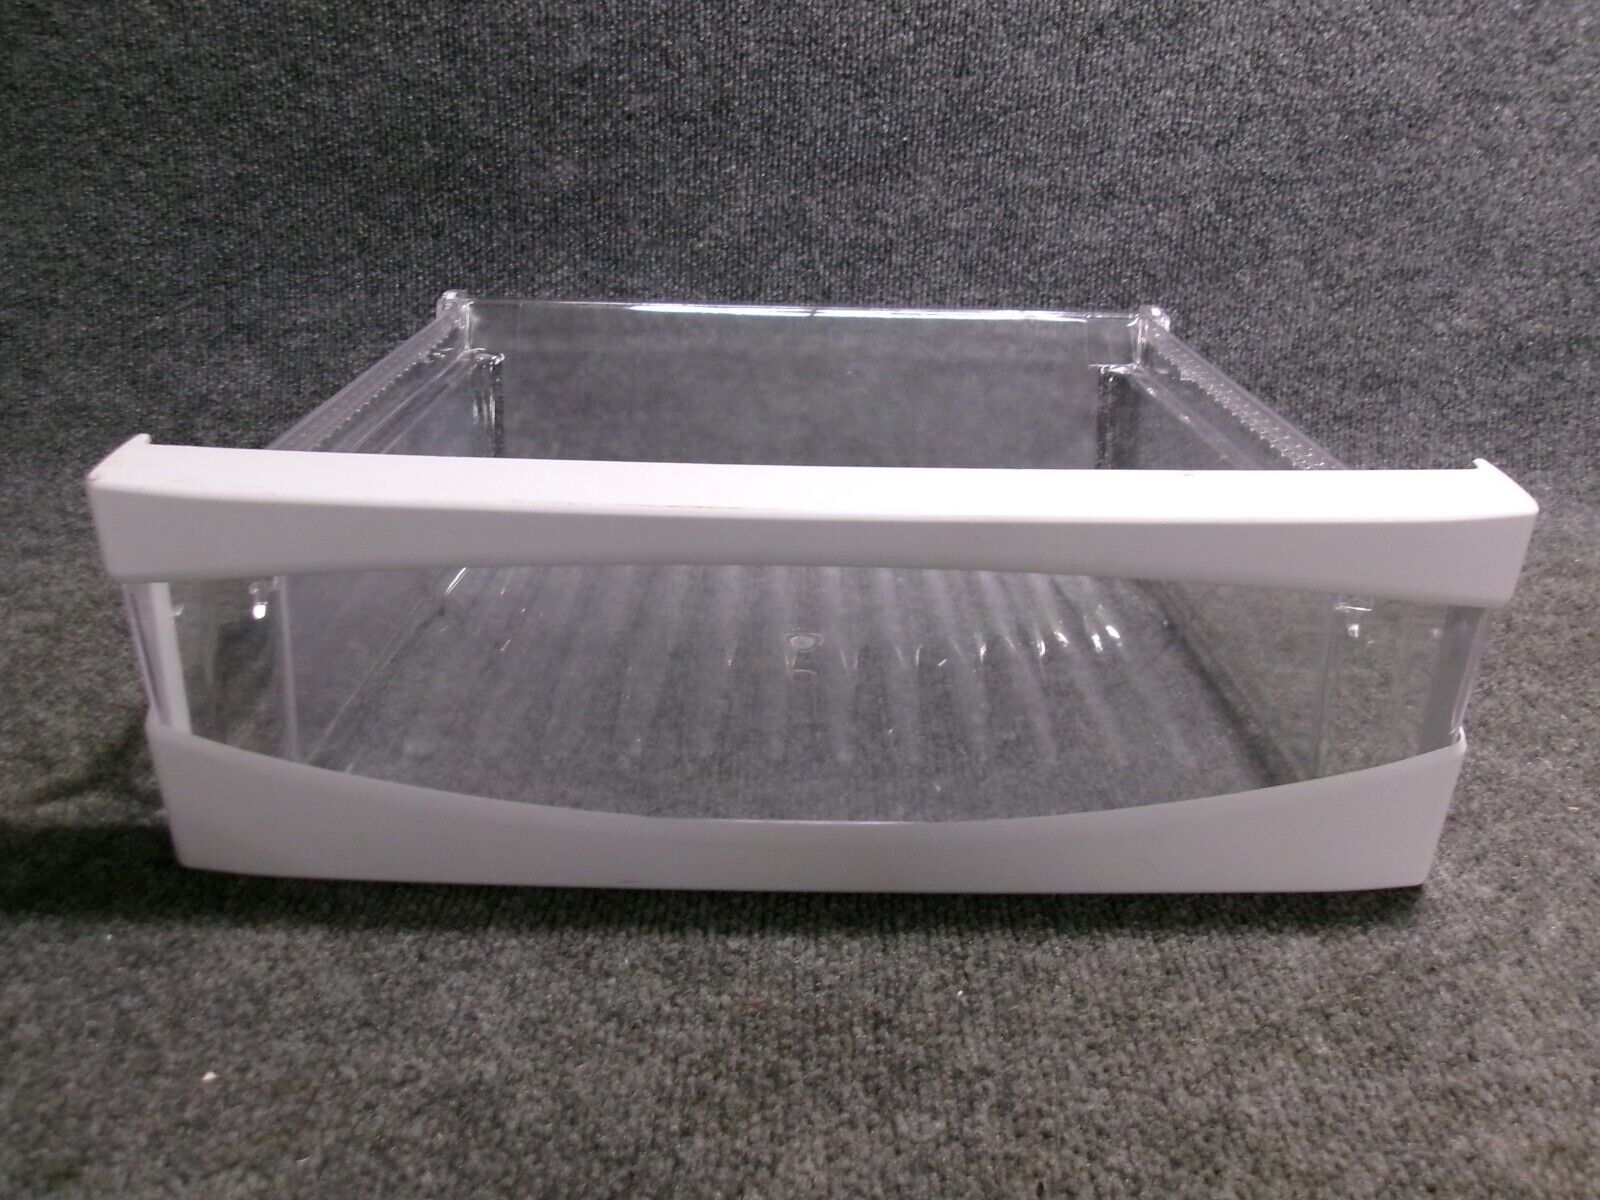 Primary image for 67005753 MAYTAG REFRIGERATOR SNACK PAN DRAWER